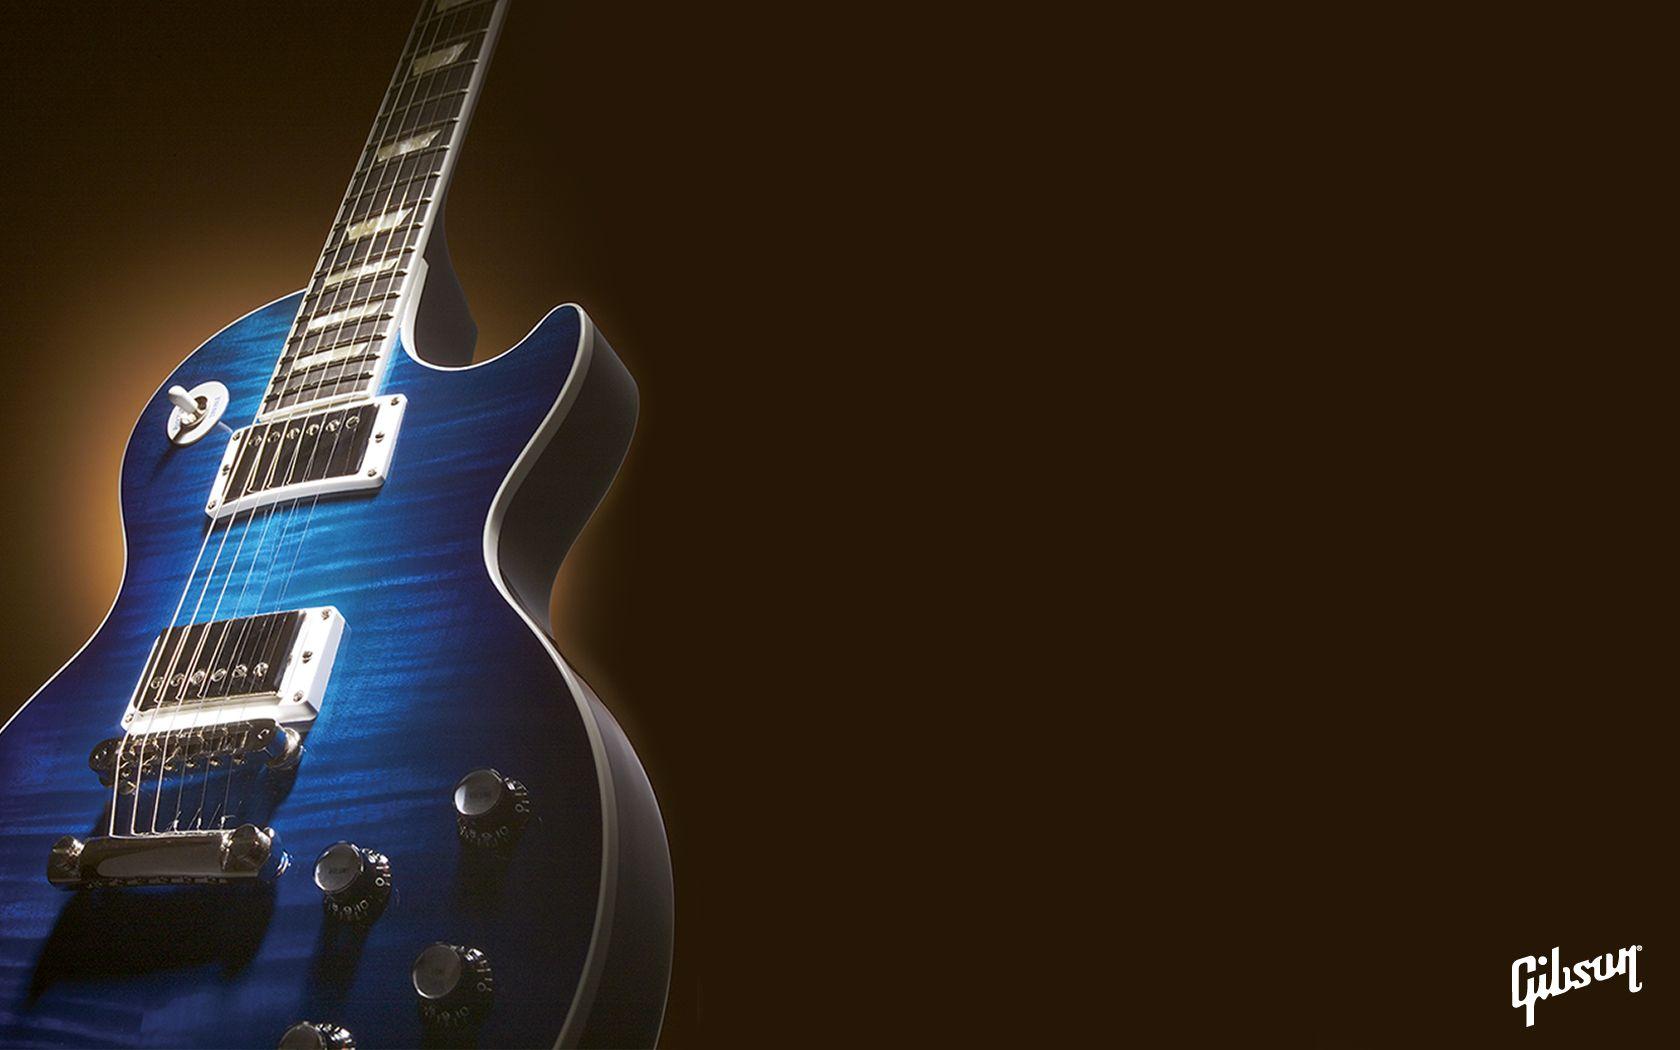 Guitars HD Wallpaper Background For Free Download, BsnSCB